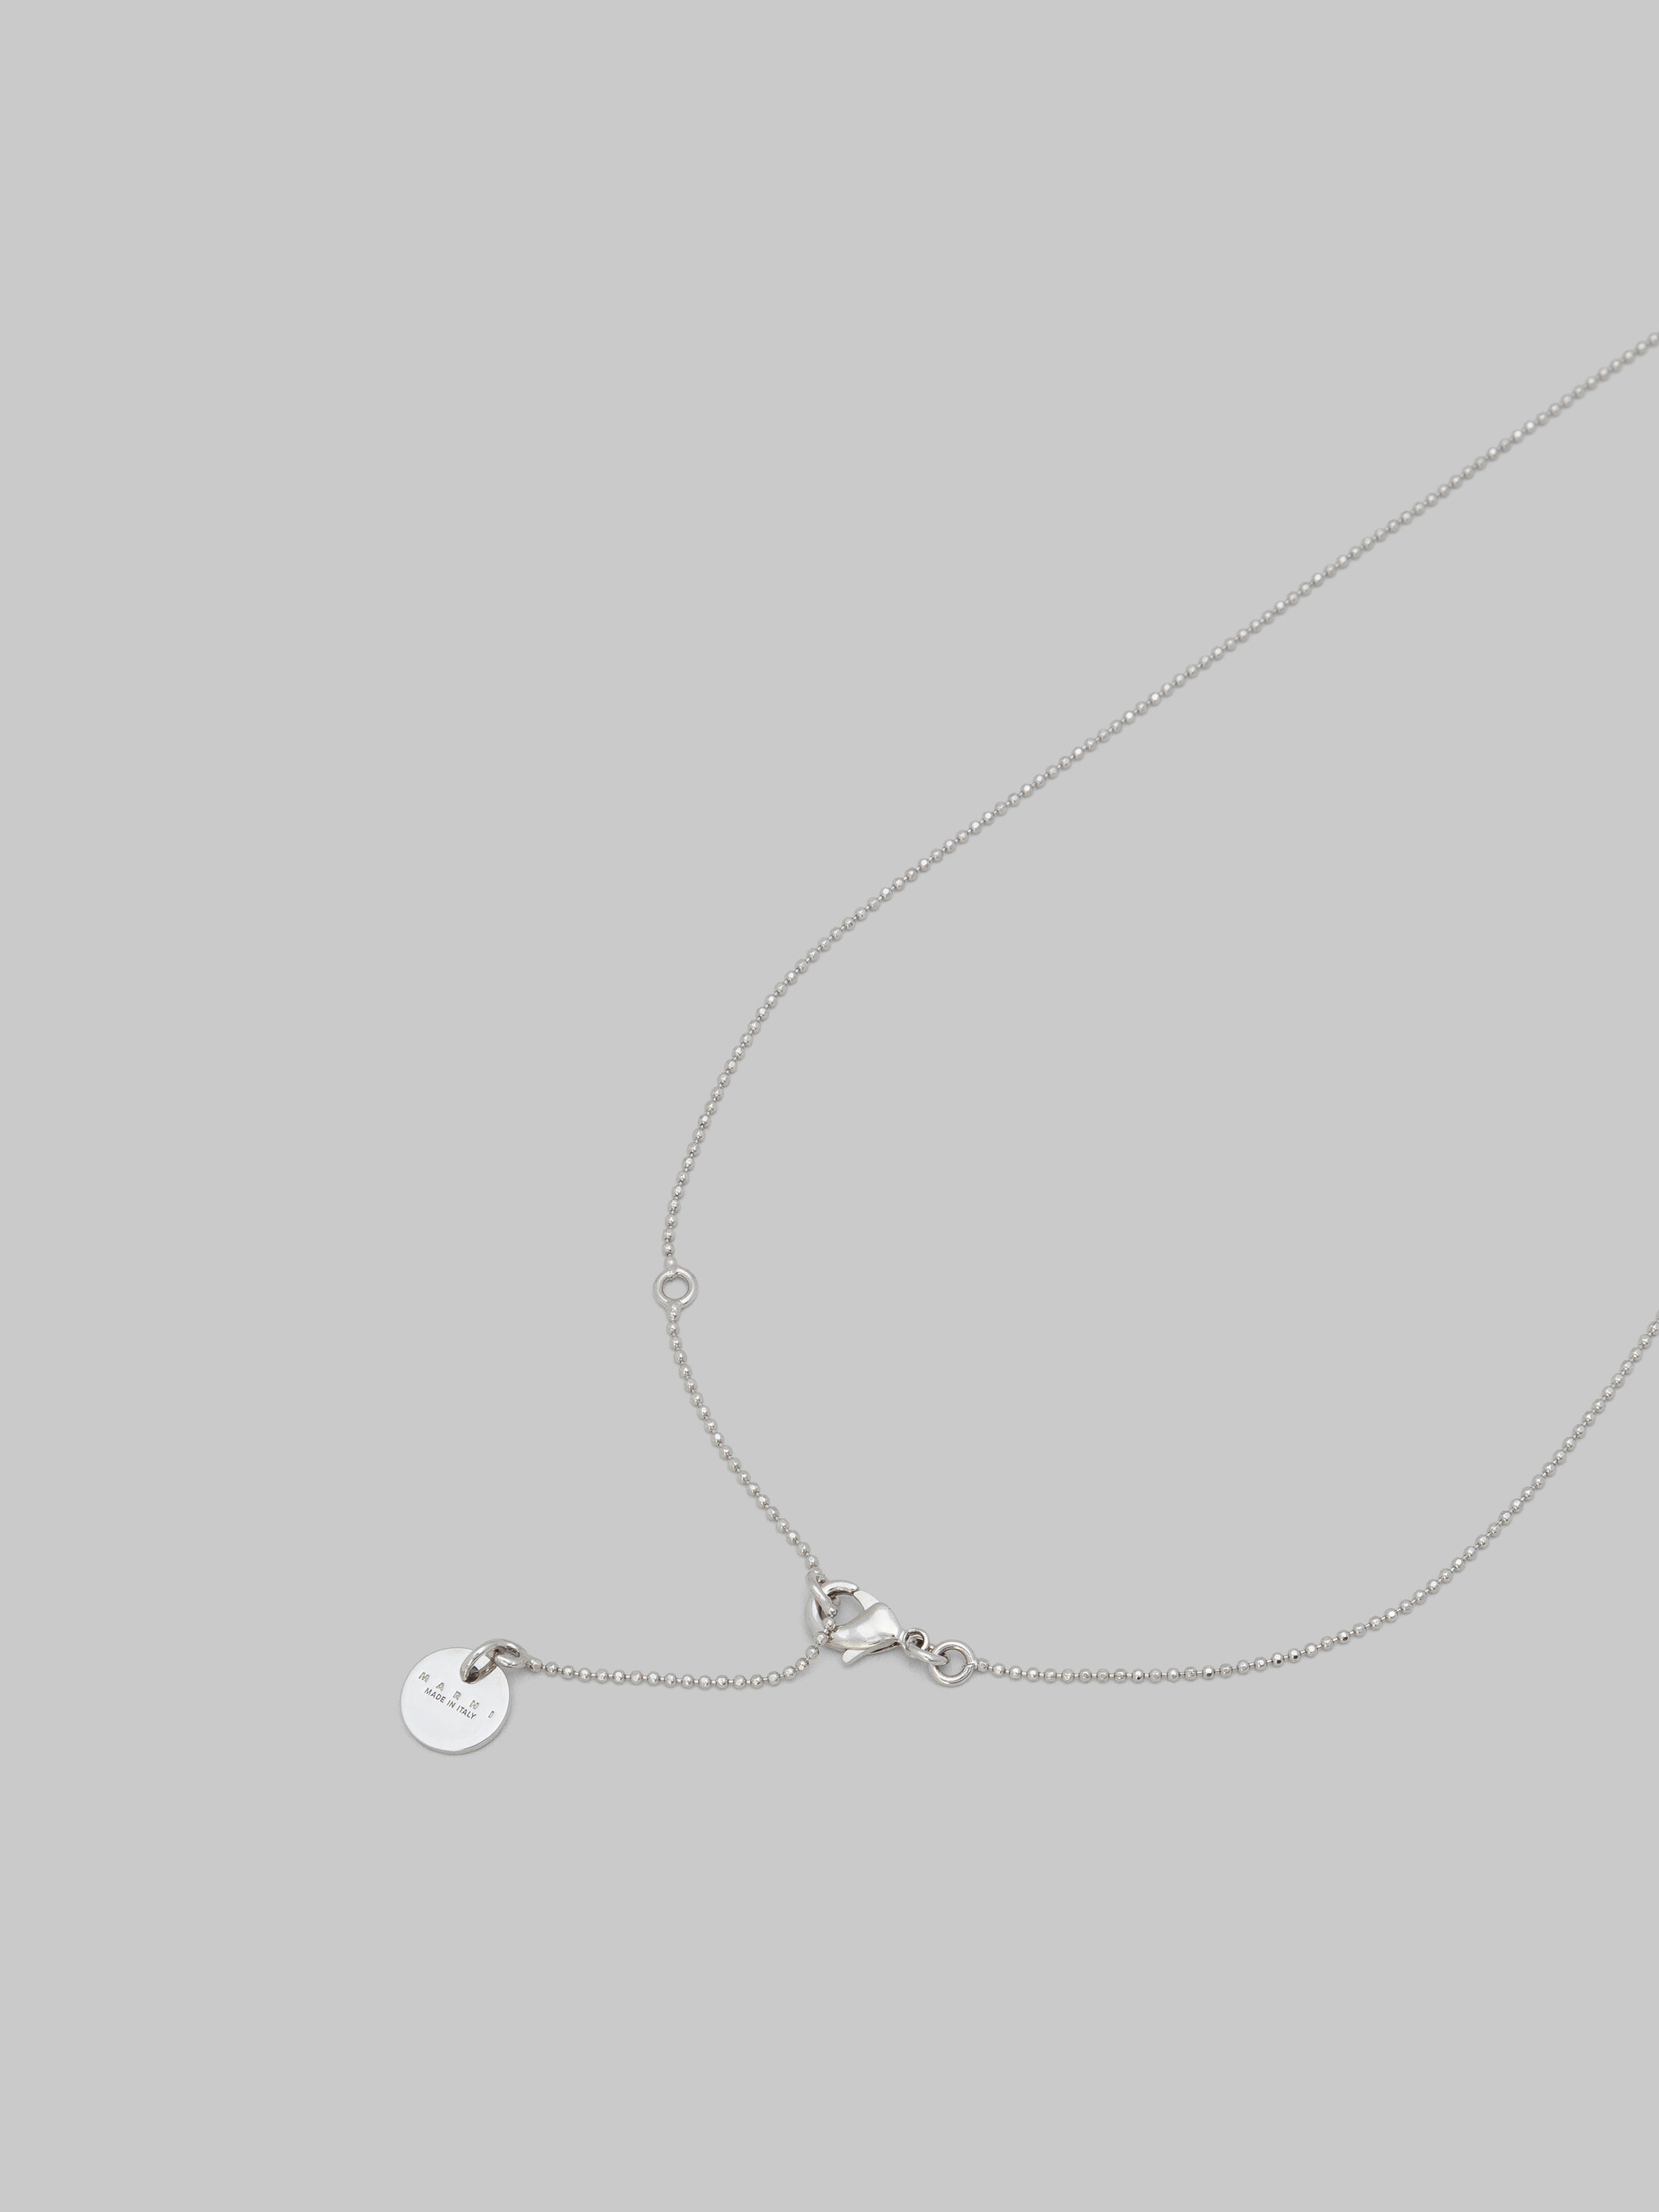 Palladium ball chain necklace with daisy pendant - Necklaces - Image 4